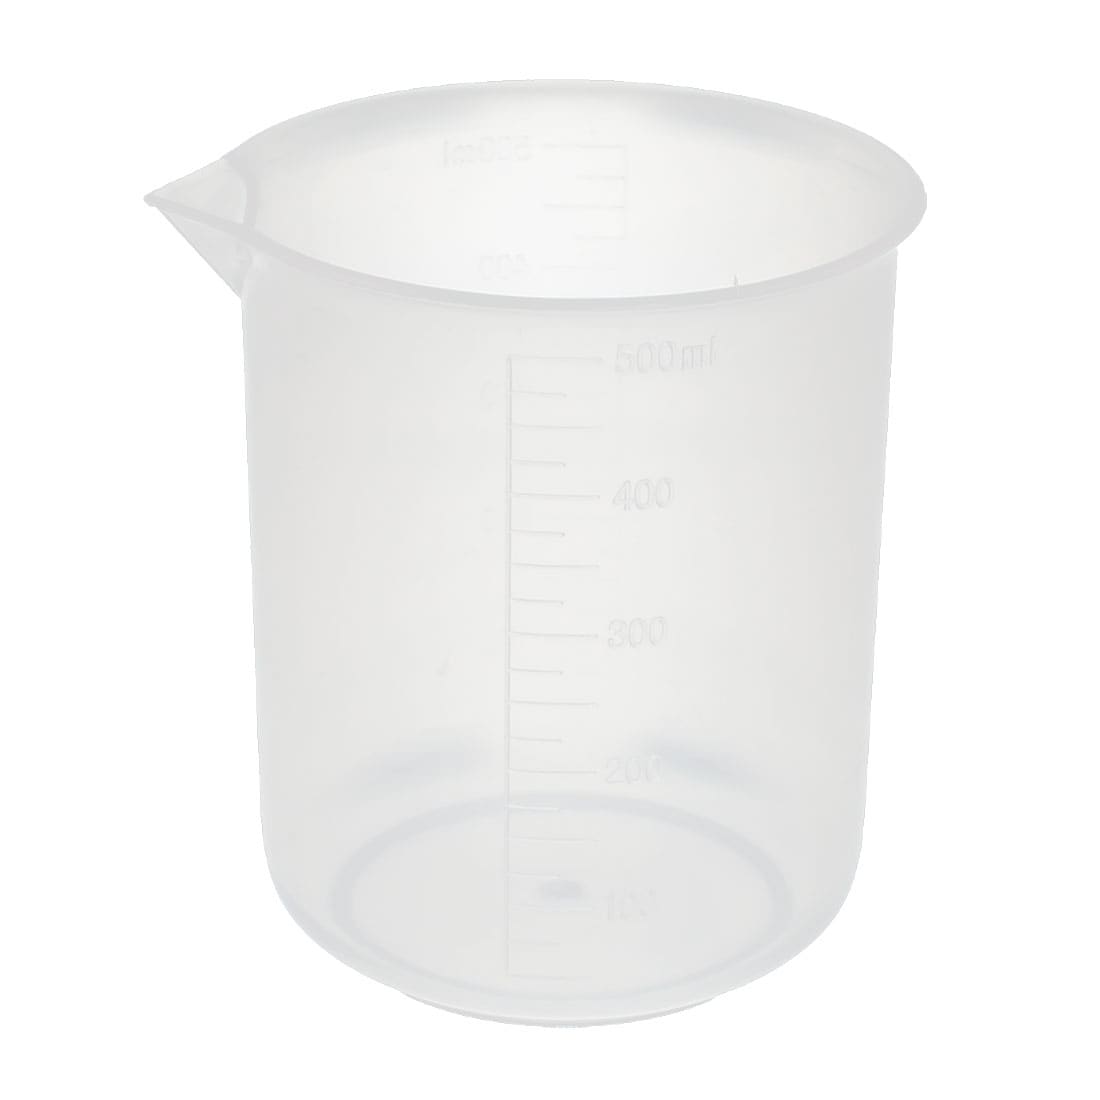 https://ak1.ostkcdn.com/images/products/is/images/direct/8f35735b4723a8506ad758d1c6391ad5138f822e/Kitchen-500mL-Clear-Plastic-Measuring-Cup-Jug-Pour-Spout-Container.jpg